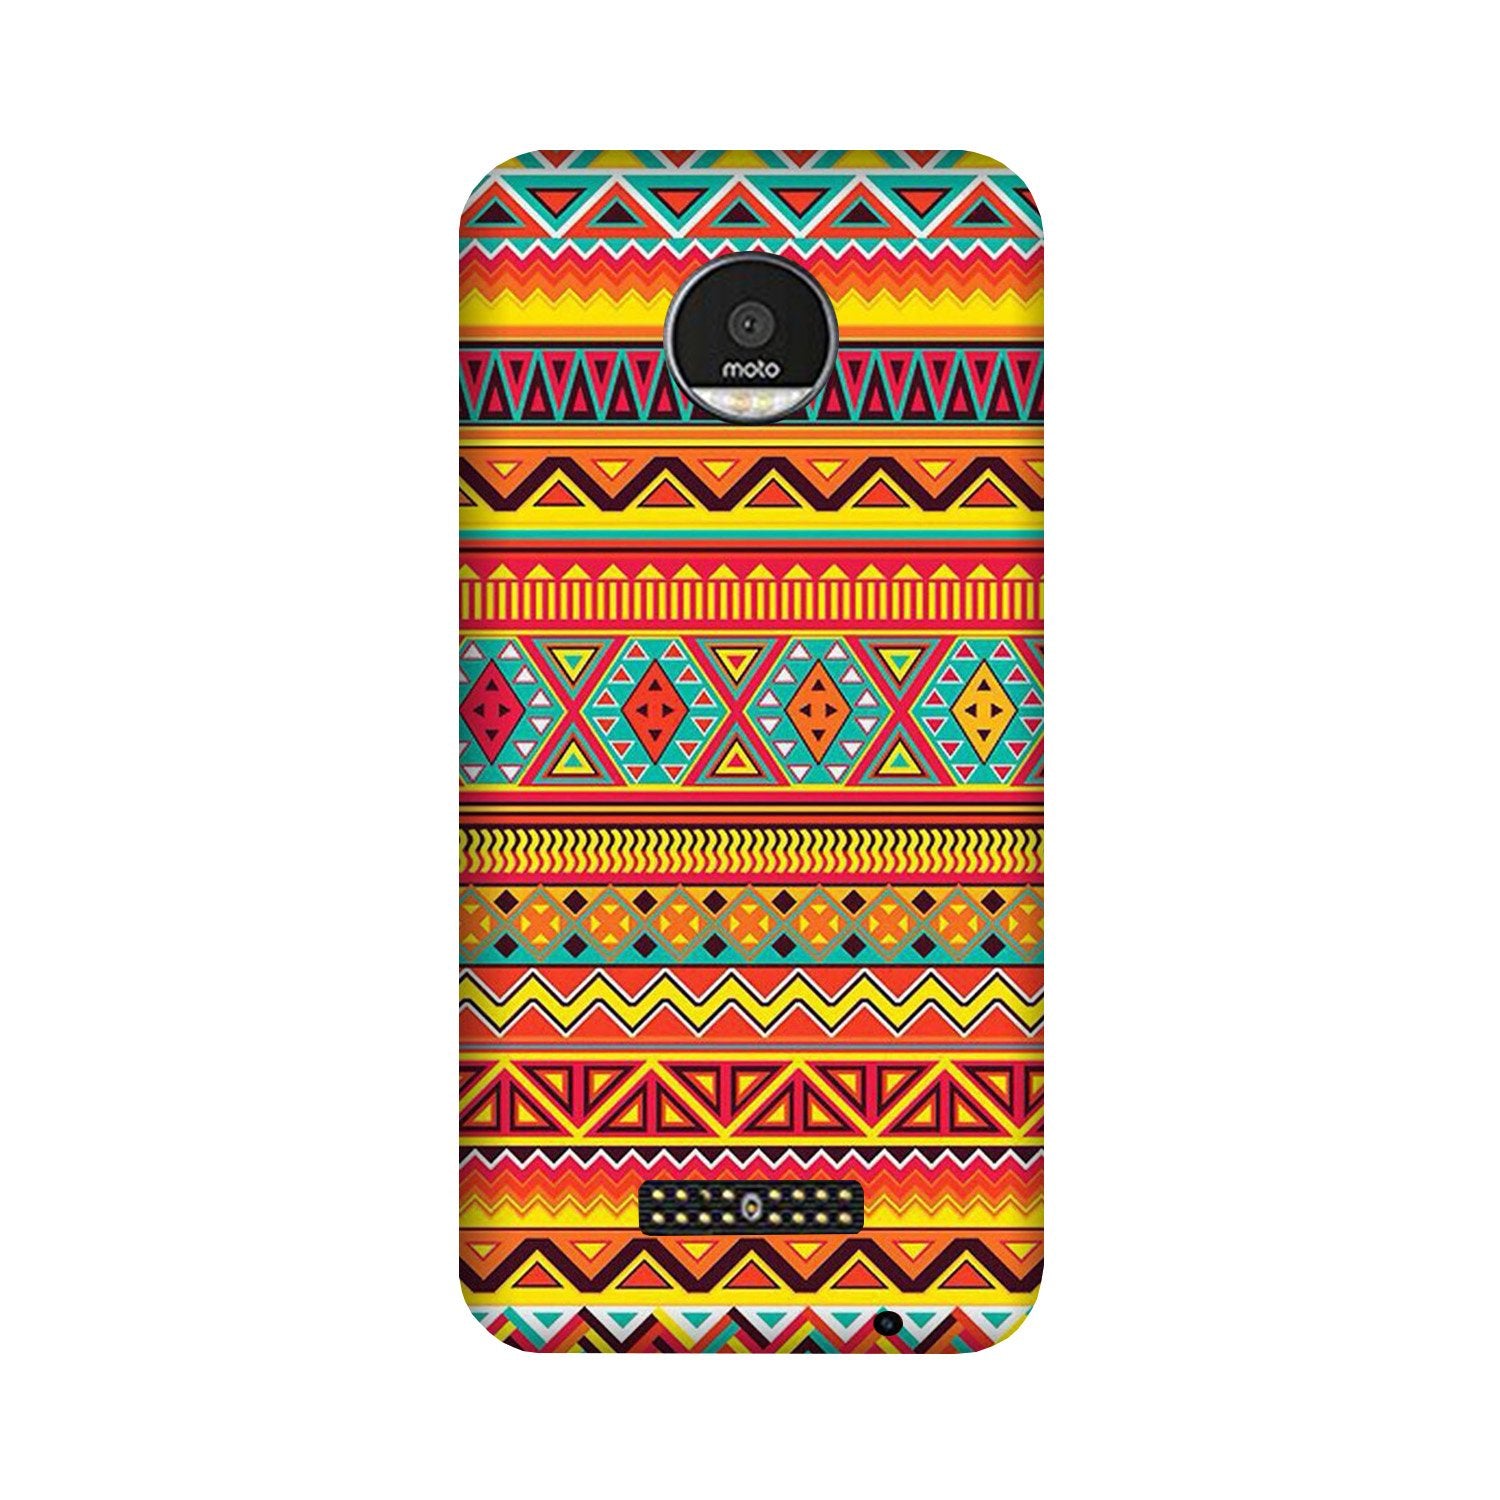 Zigzag line pattern Case for Moto Z Play